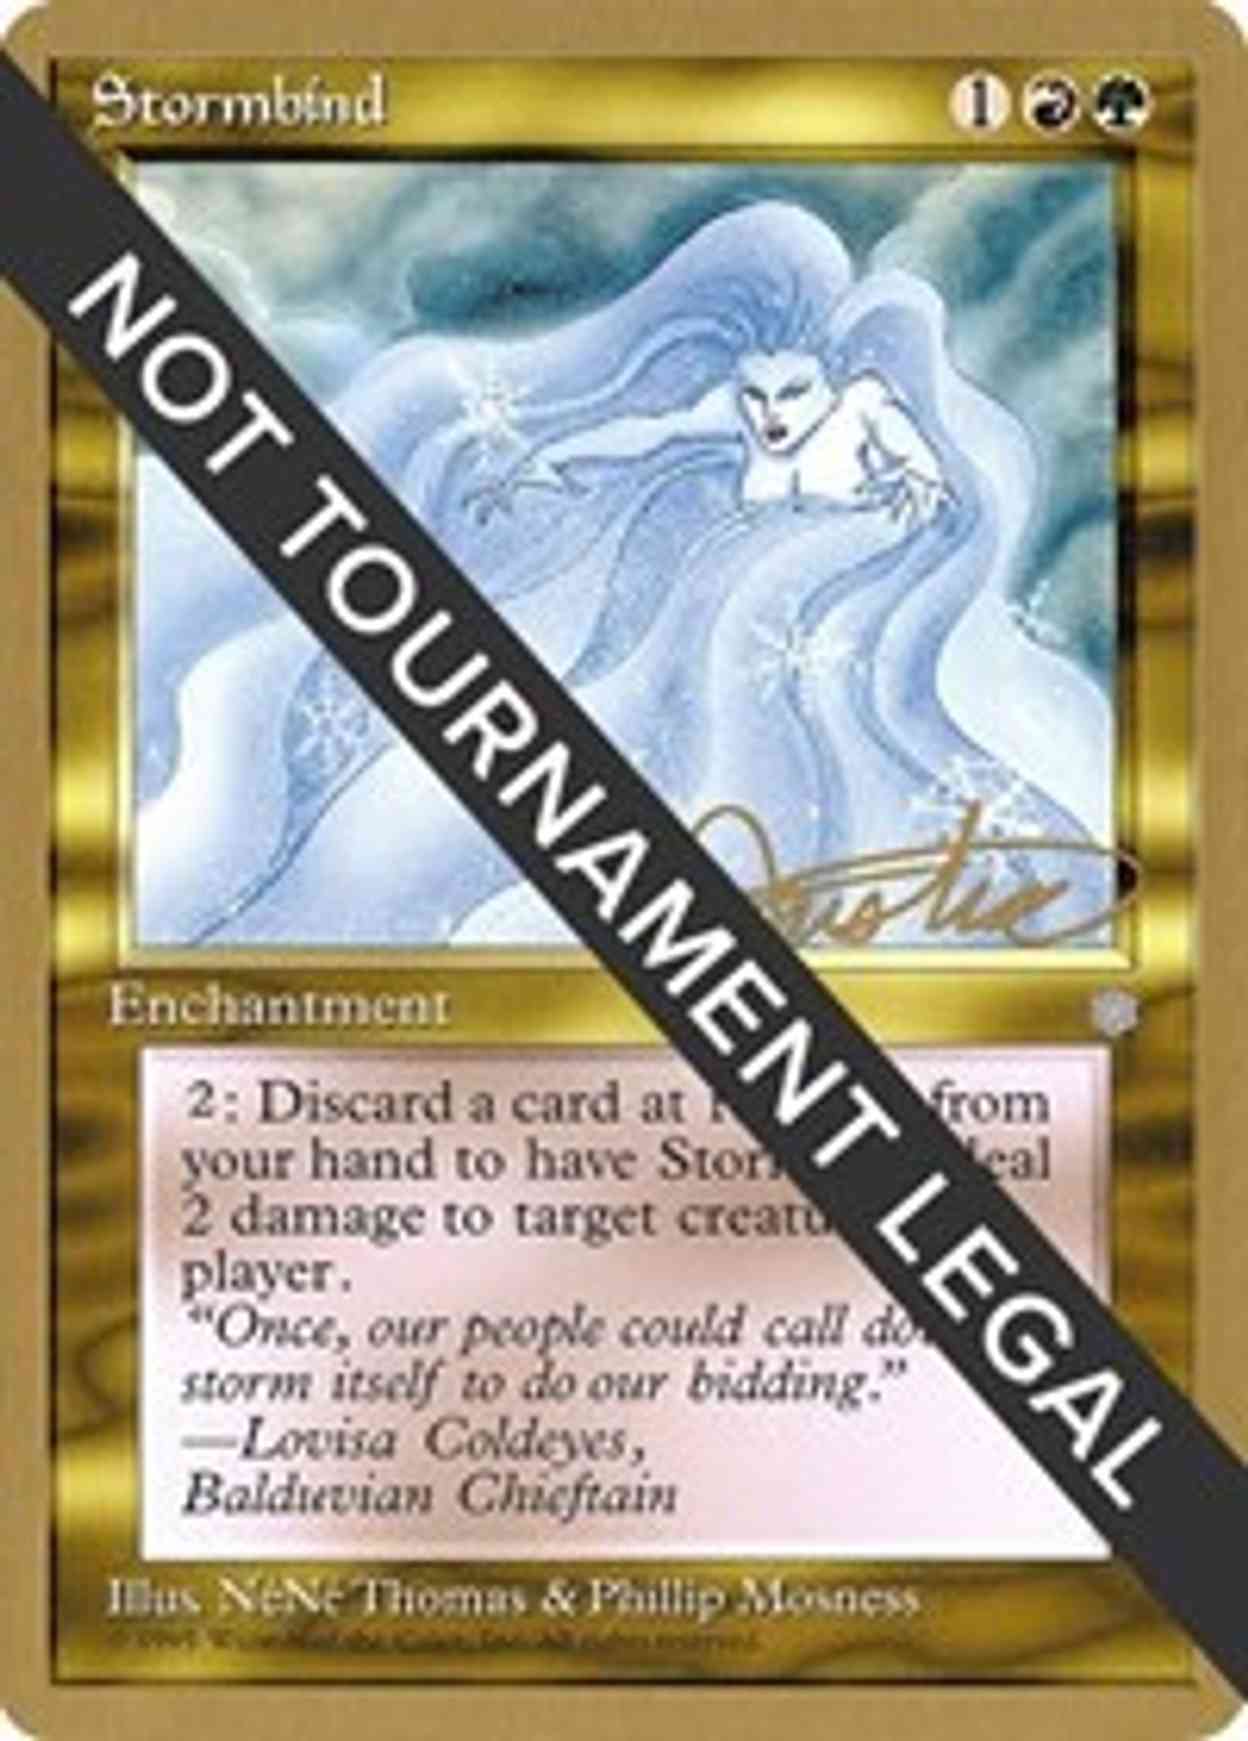 Stormbind - 1996 Mark Justice (ICE) magic card front